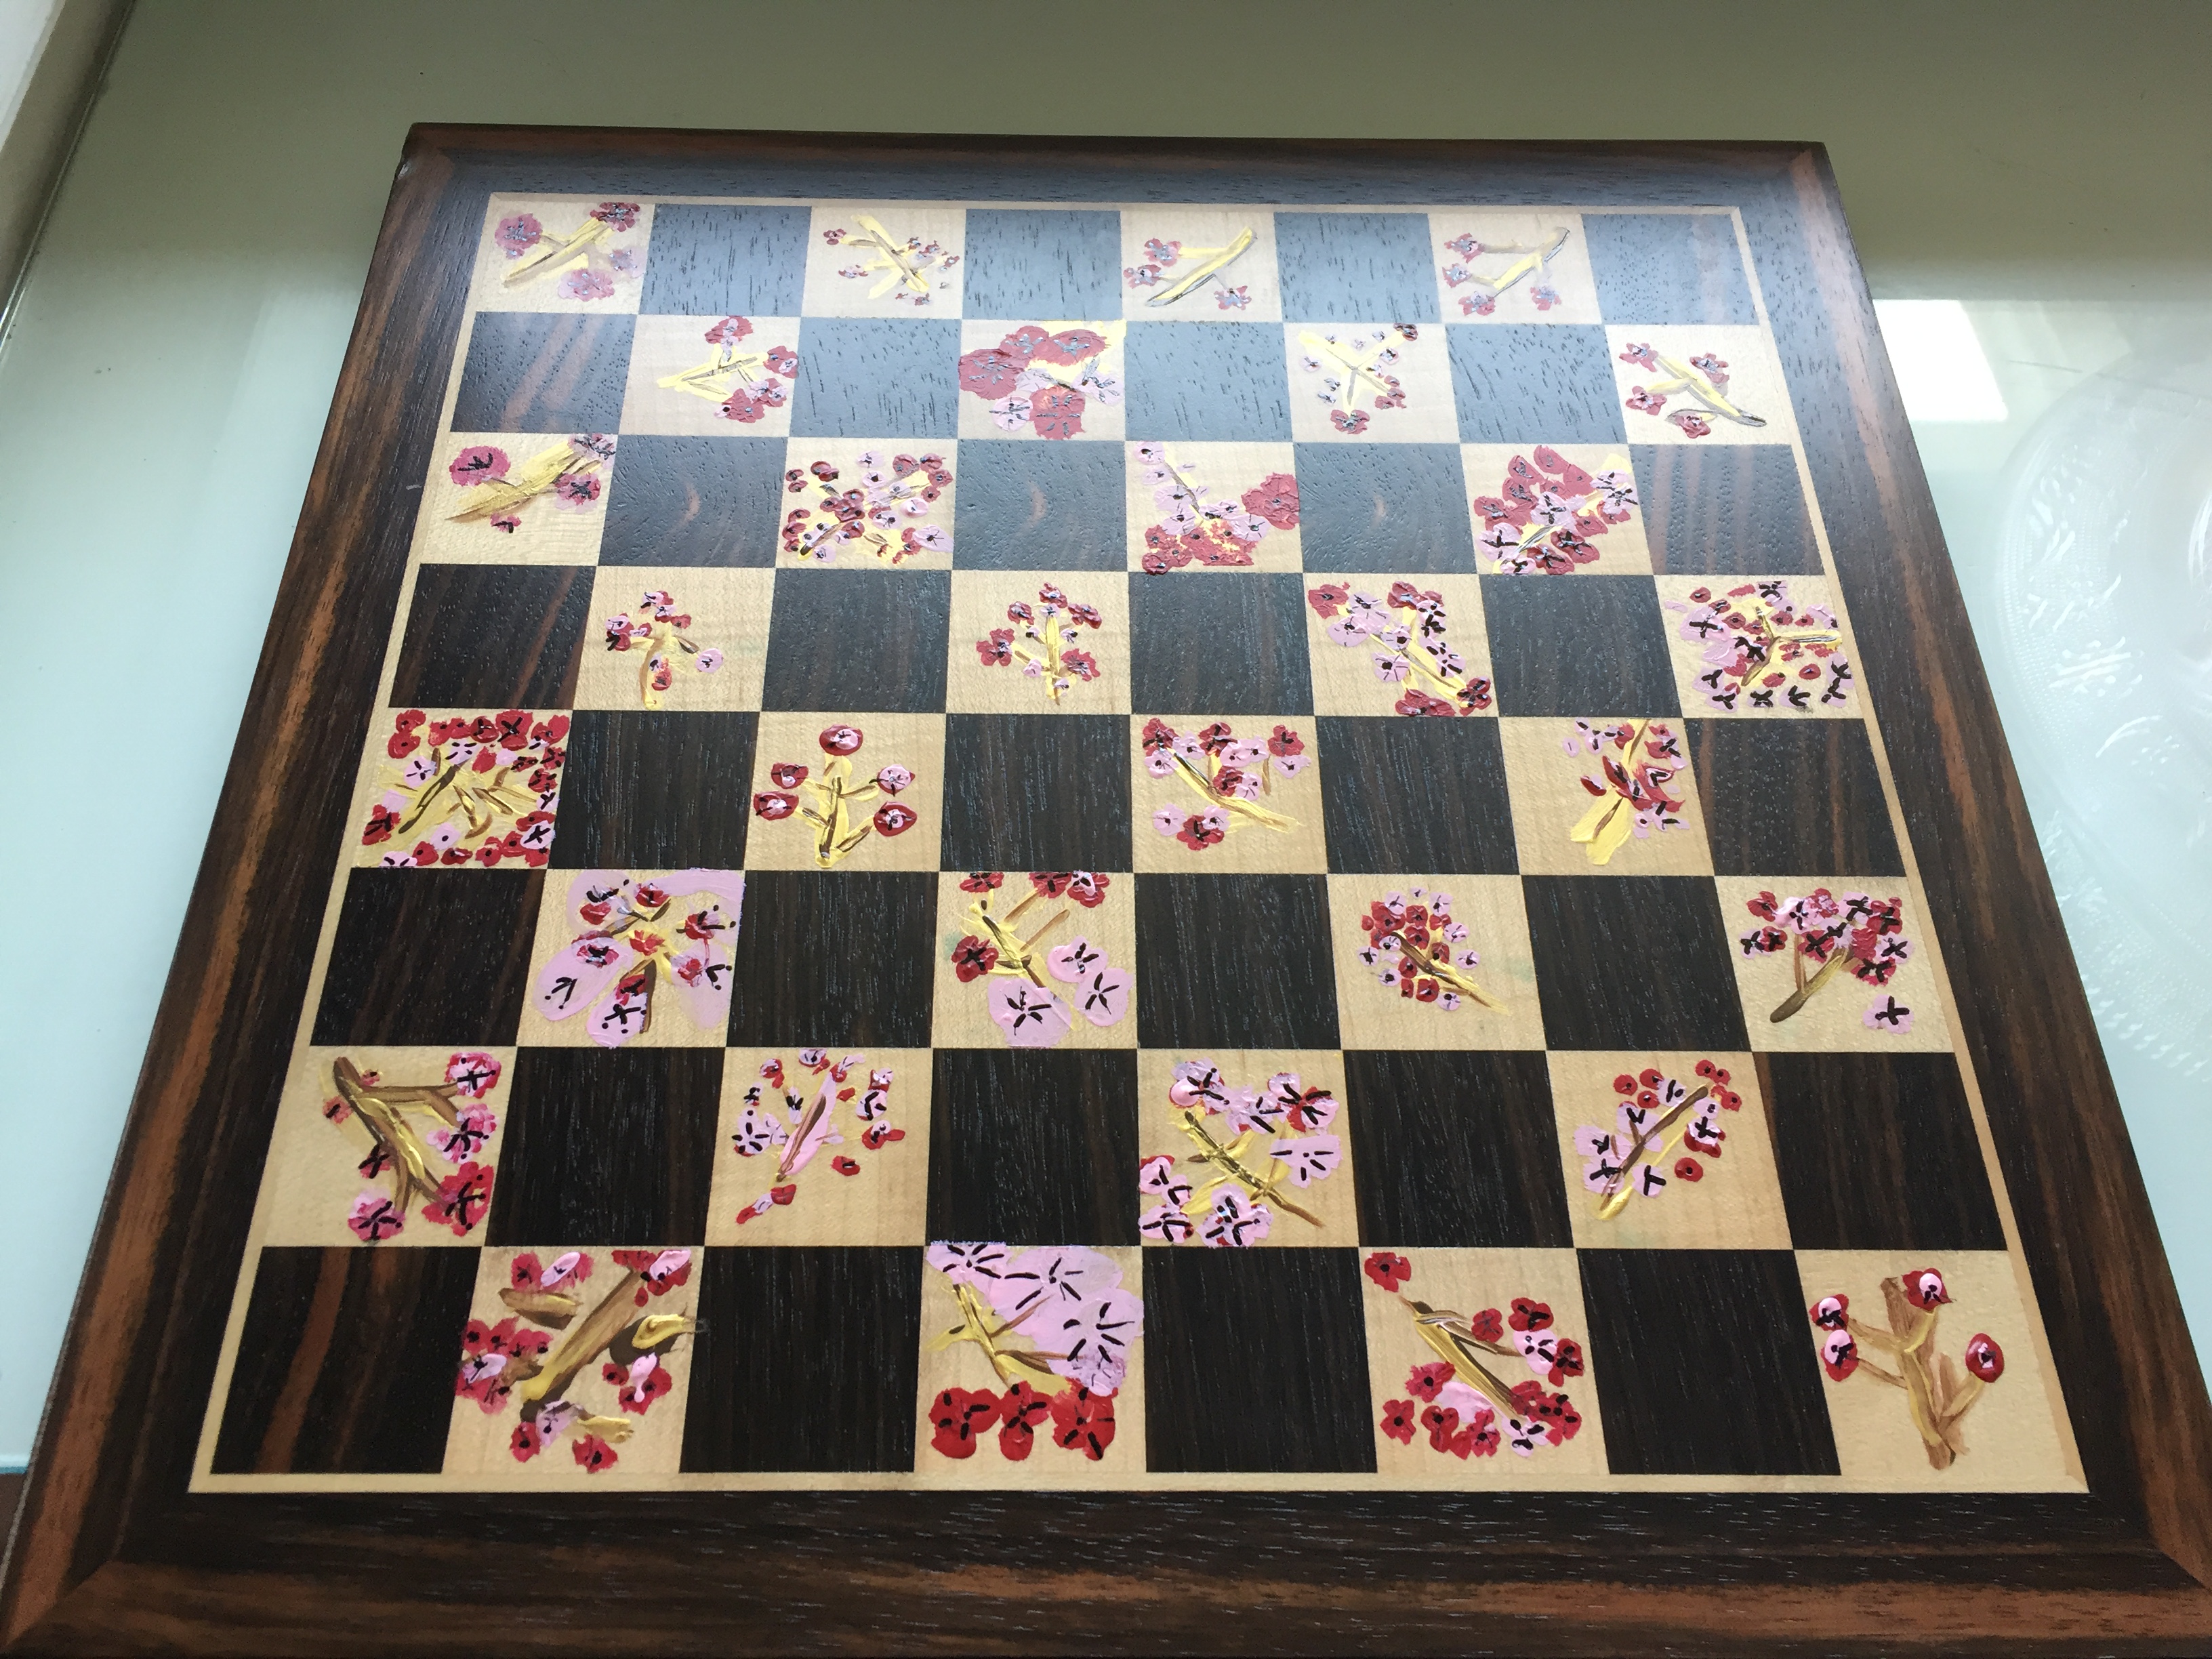 Kindergartners Paint Chess Sets like this flower one